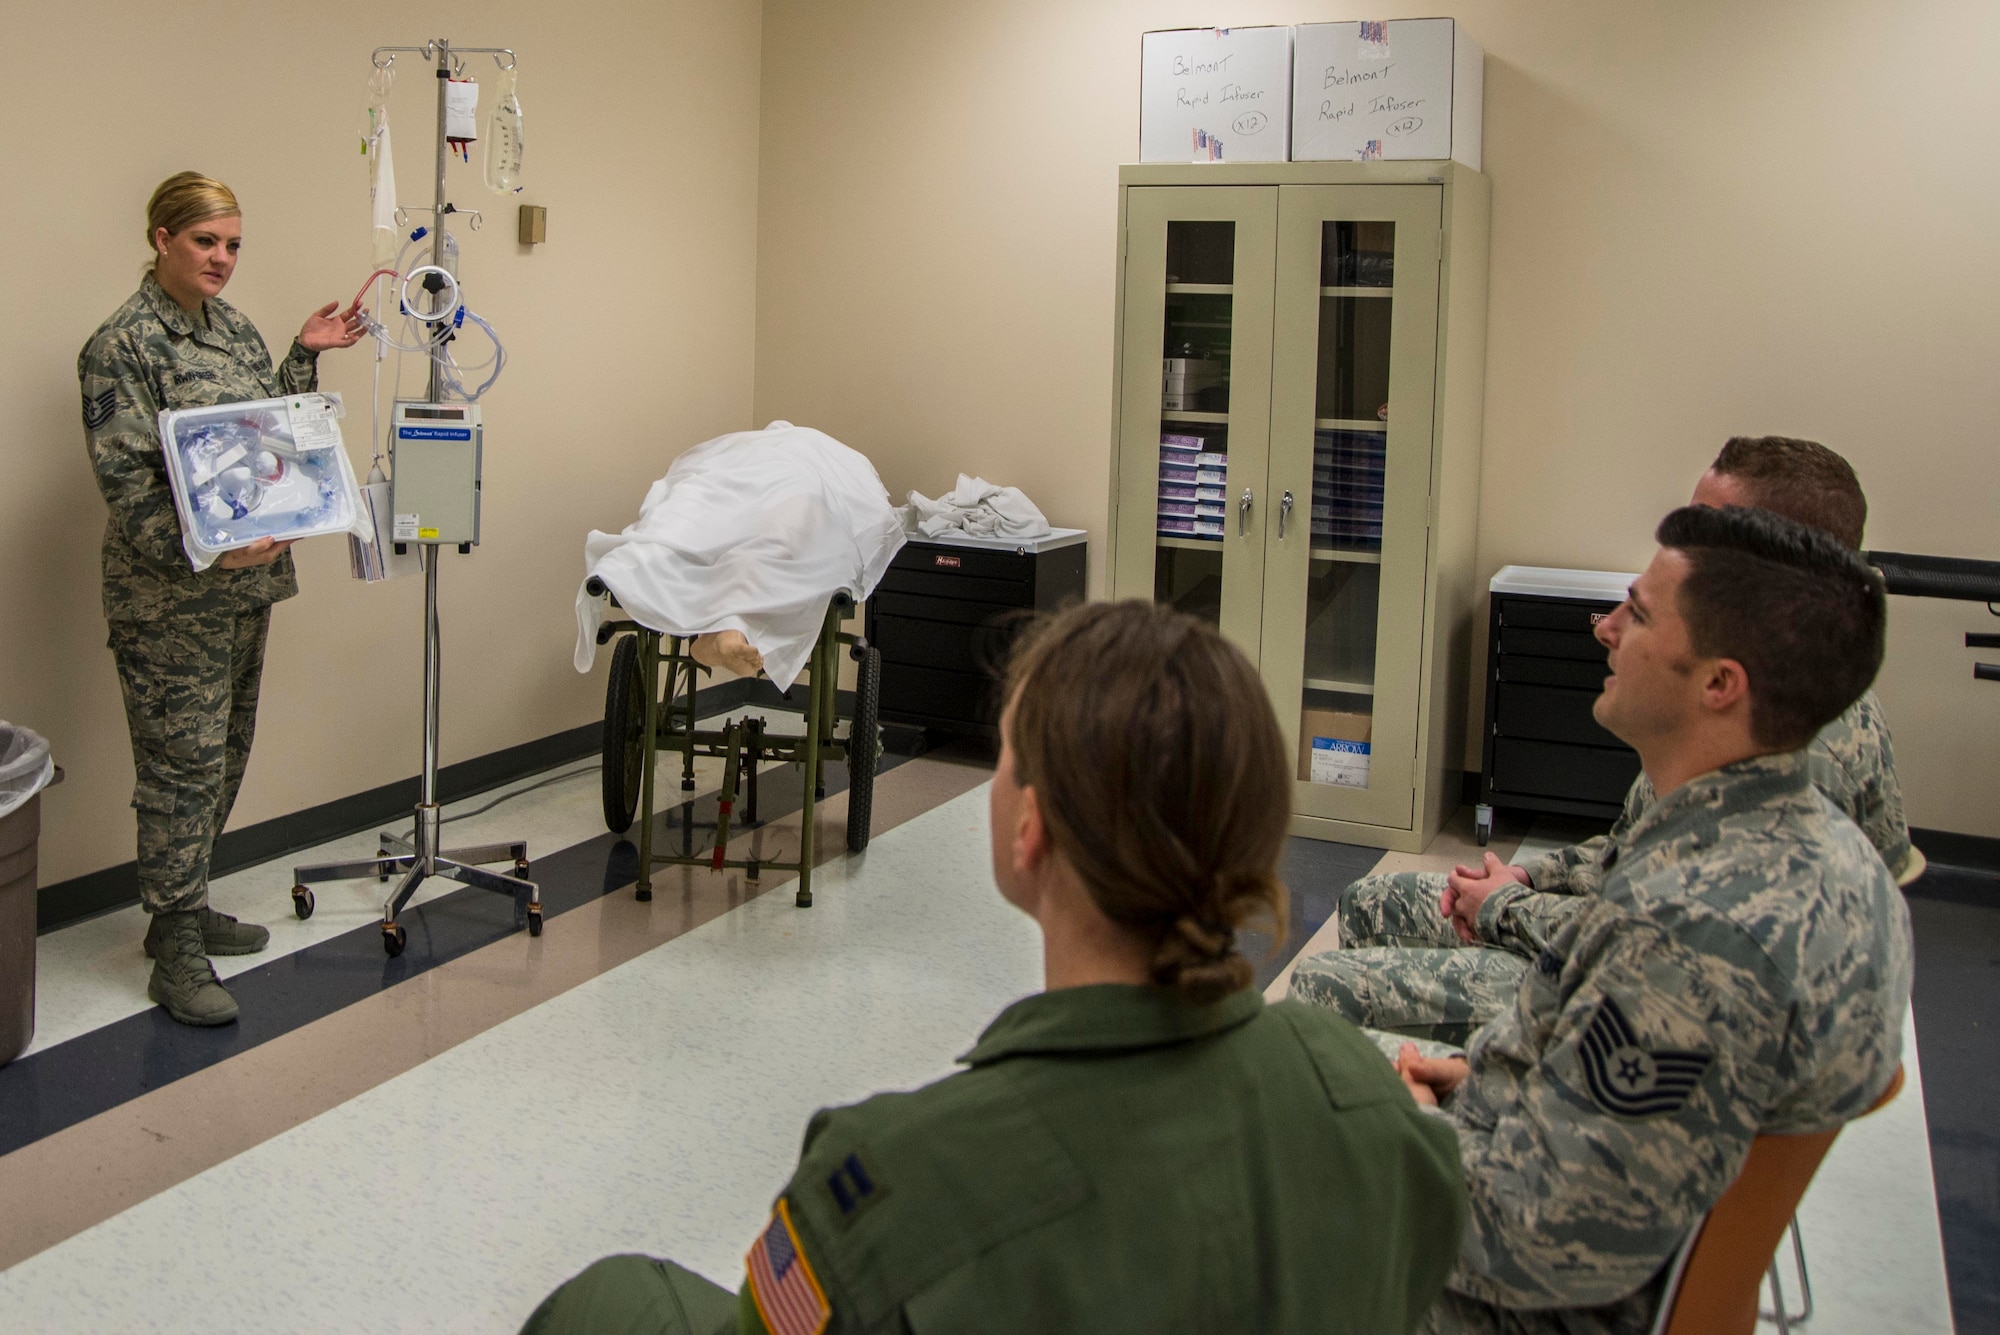 Tech. Sgt. Emily Irwin-Green, St. Louis Center for Sustainment of Trauma and Rediness Skills emergency and trauma nursing instructor, discusses the uses of various medical euipment during a C-STARS course in St. Louis Missiouri, March 20, 2017. Irwin-Green said her favorite part of the job is seeing the confidence in her students grow while providing them the skills needed to potentially save the lives of her brothers and sisters-in-arms. (U.S. Air Force Photo by Airman 1st Class Daniel Garcia)